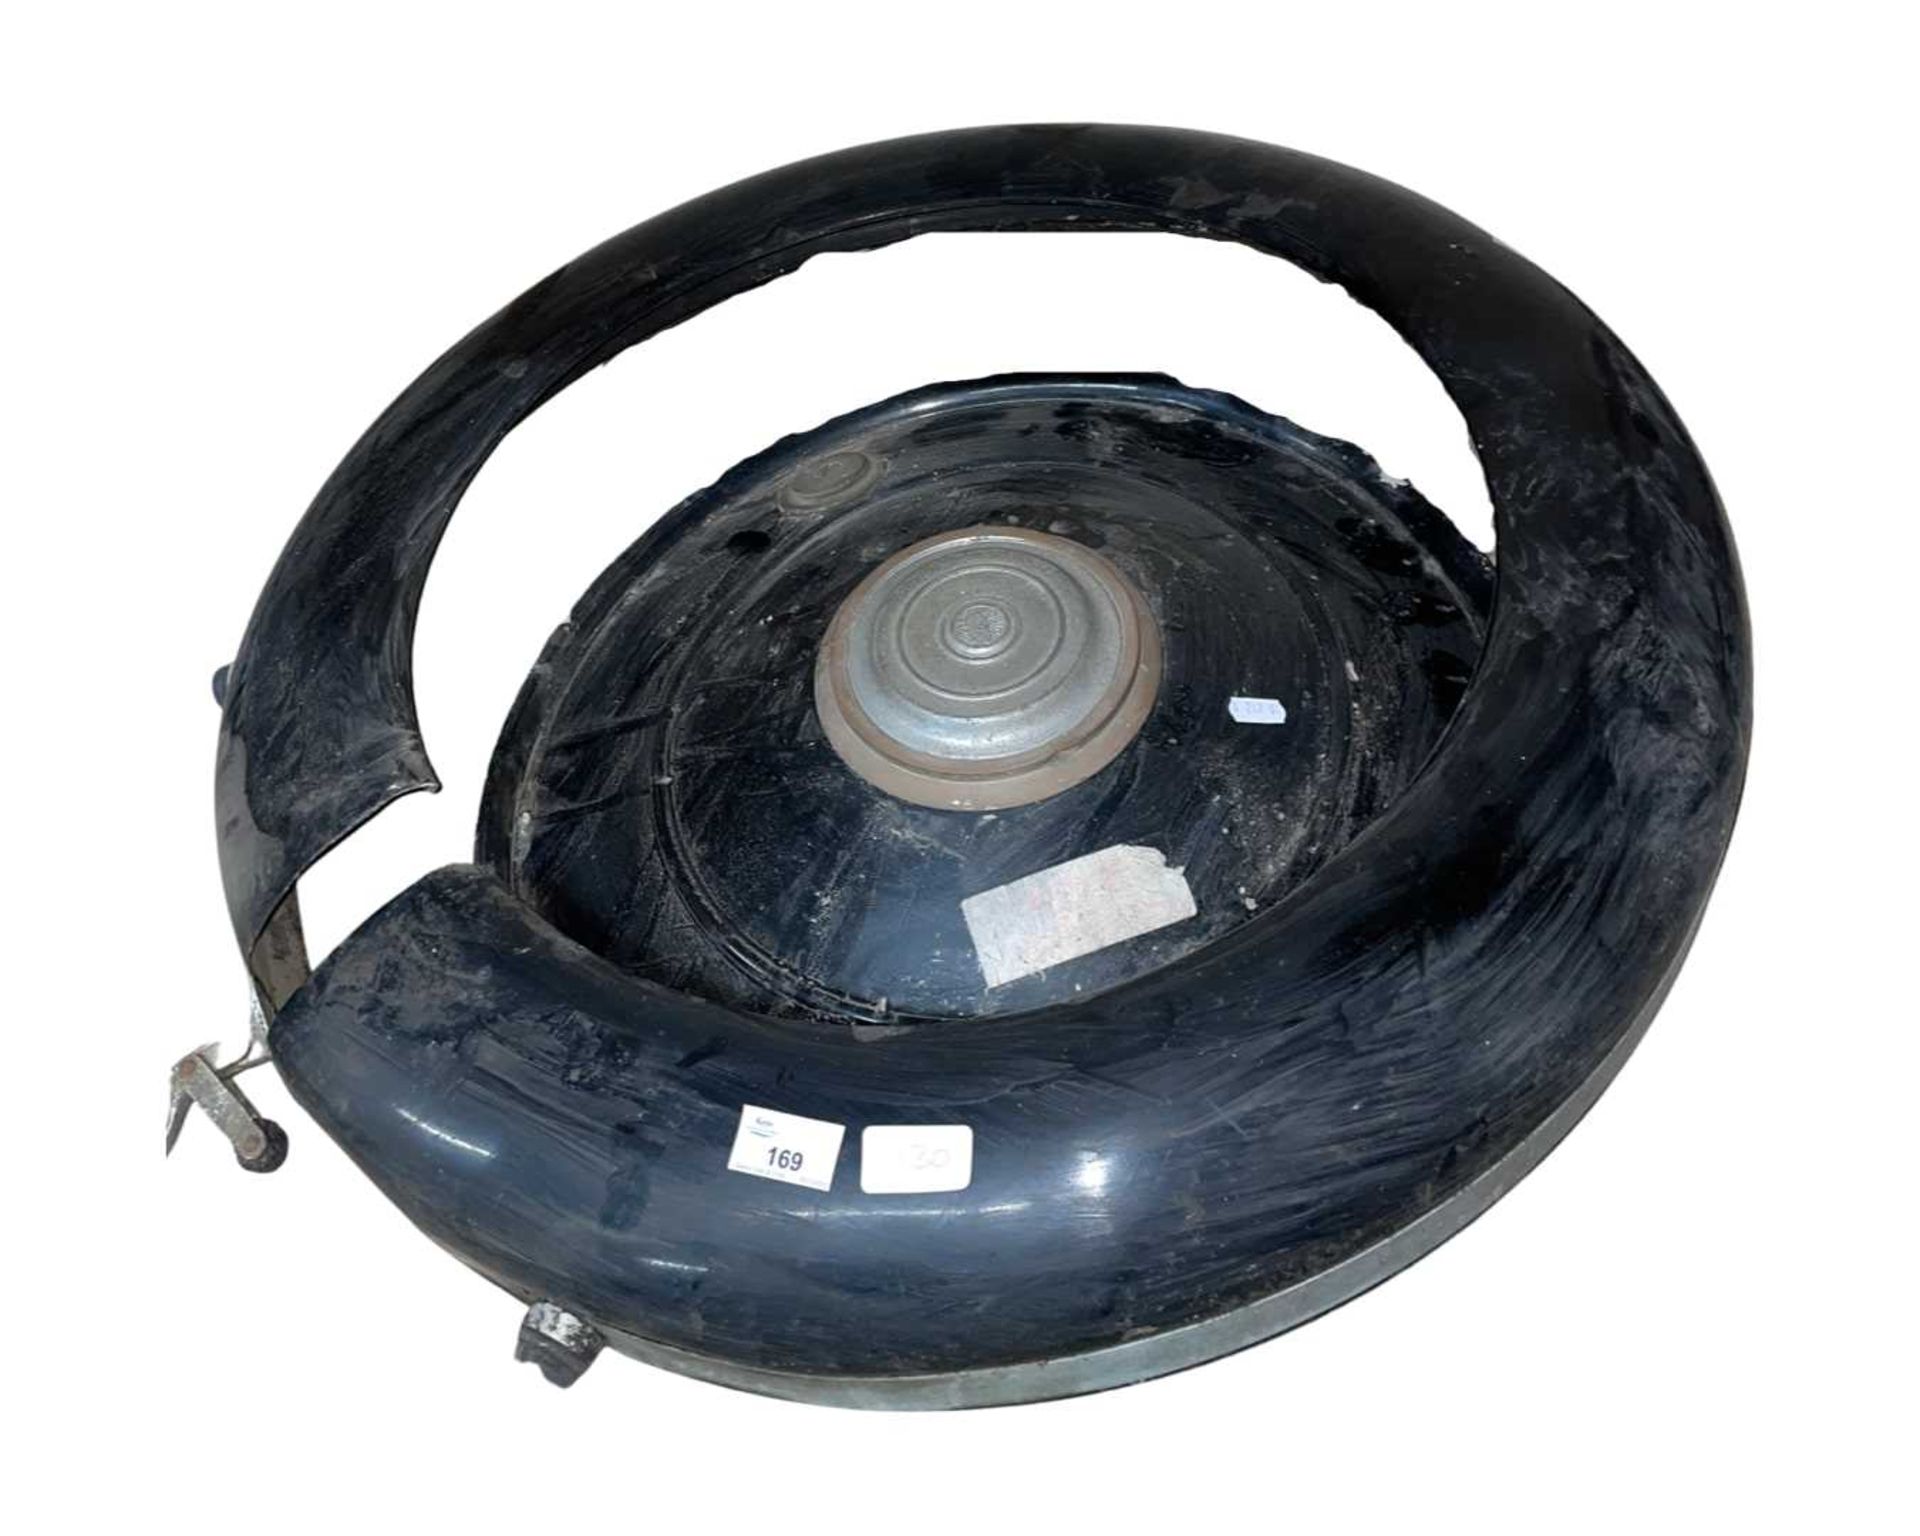 18 inch spare wheel cover, possibly 1930's for an MG etc